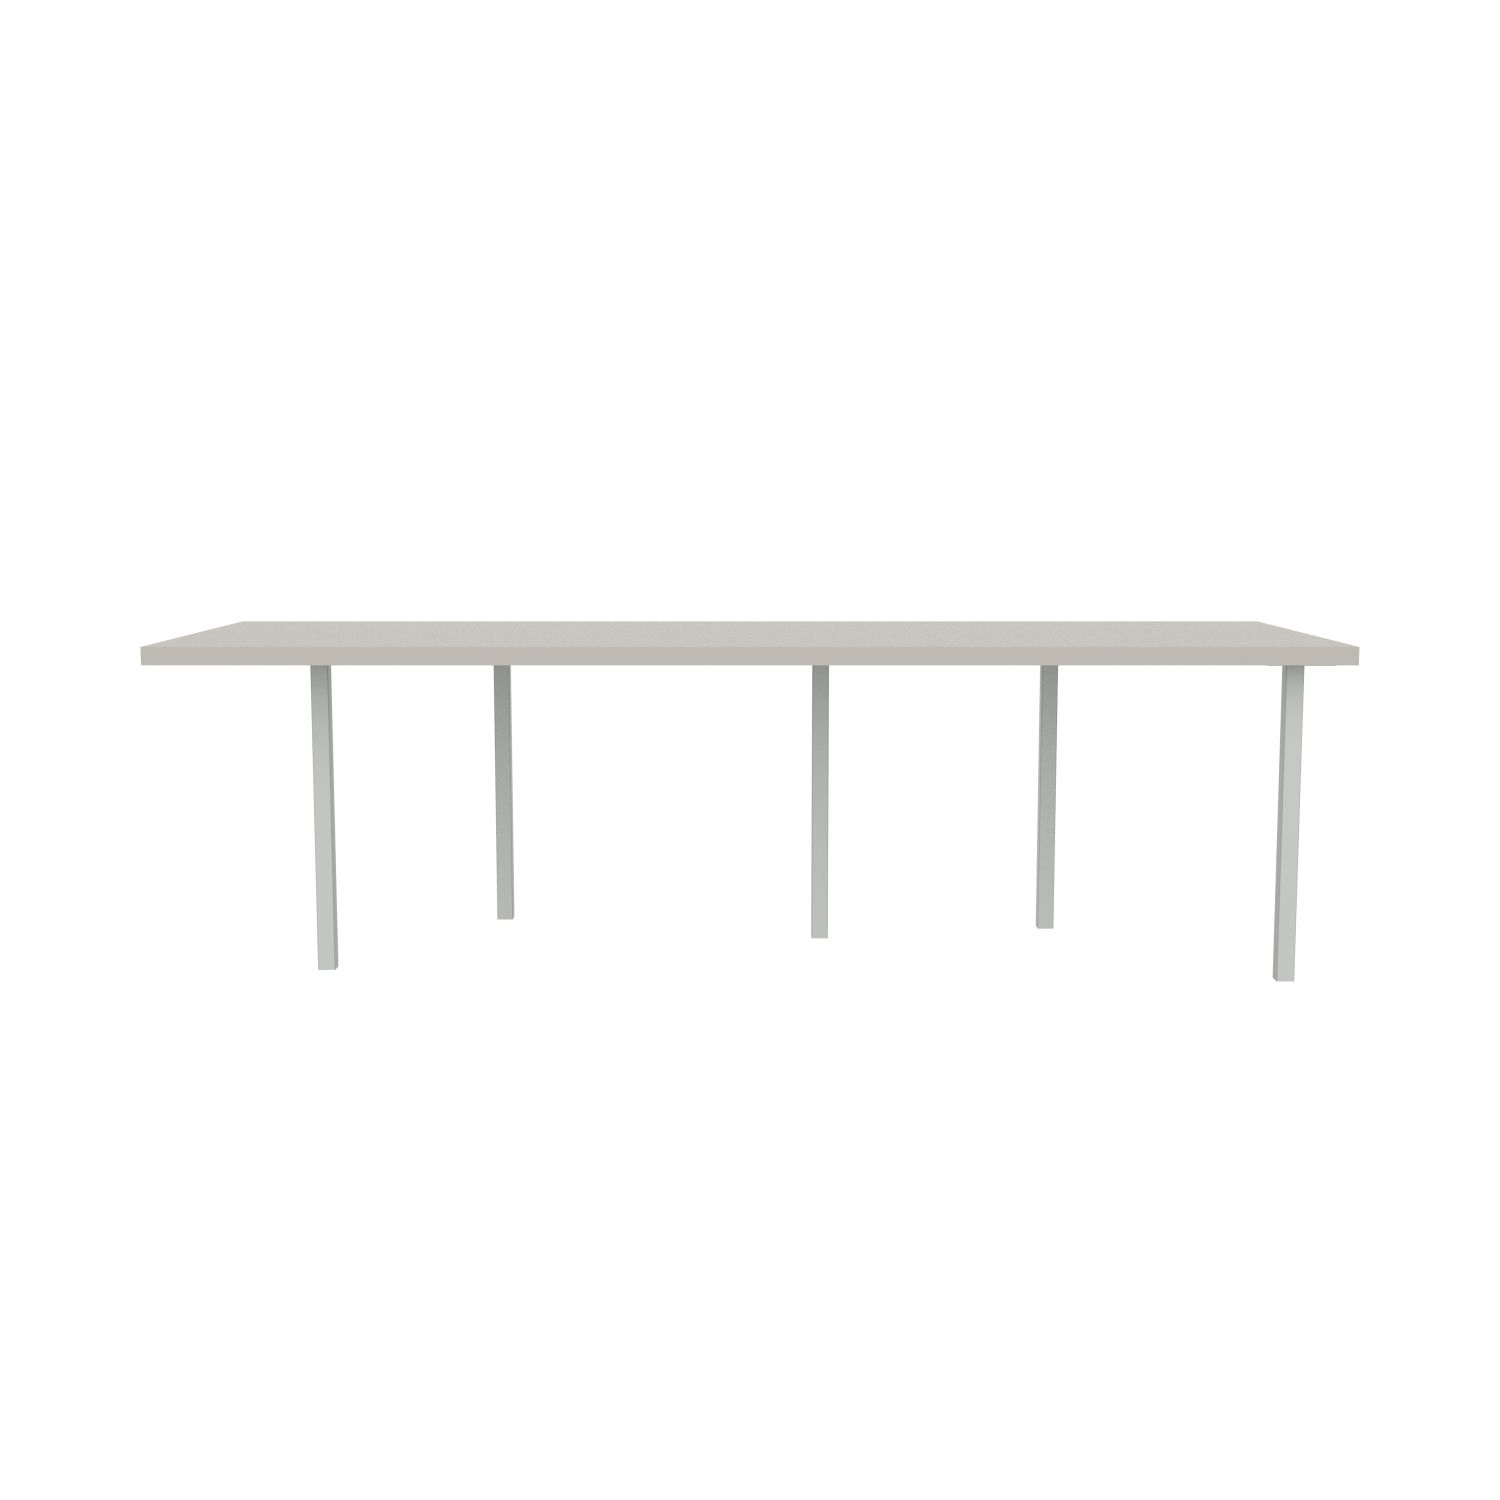 lensvelt bbrand table five fixed heigt 915x264 hpl white 50 mm price level 1 light grey ral7035